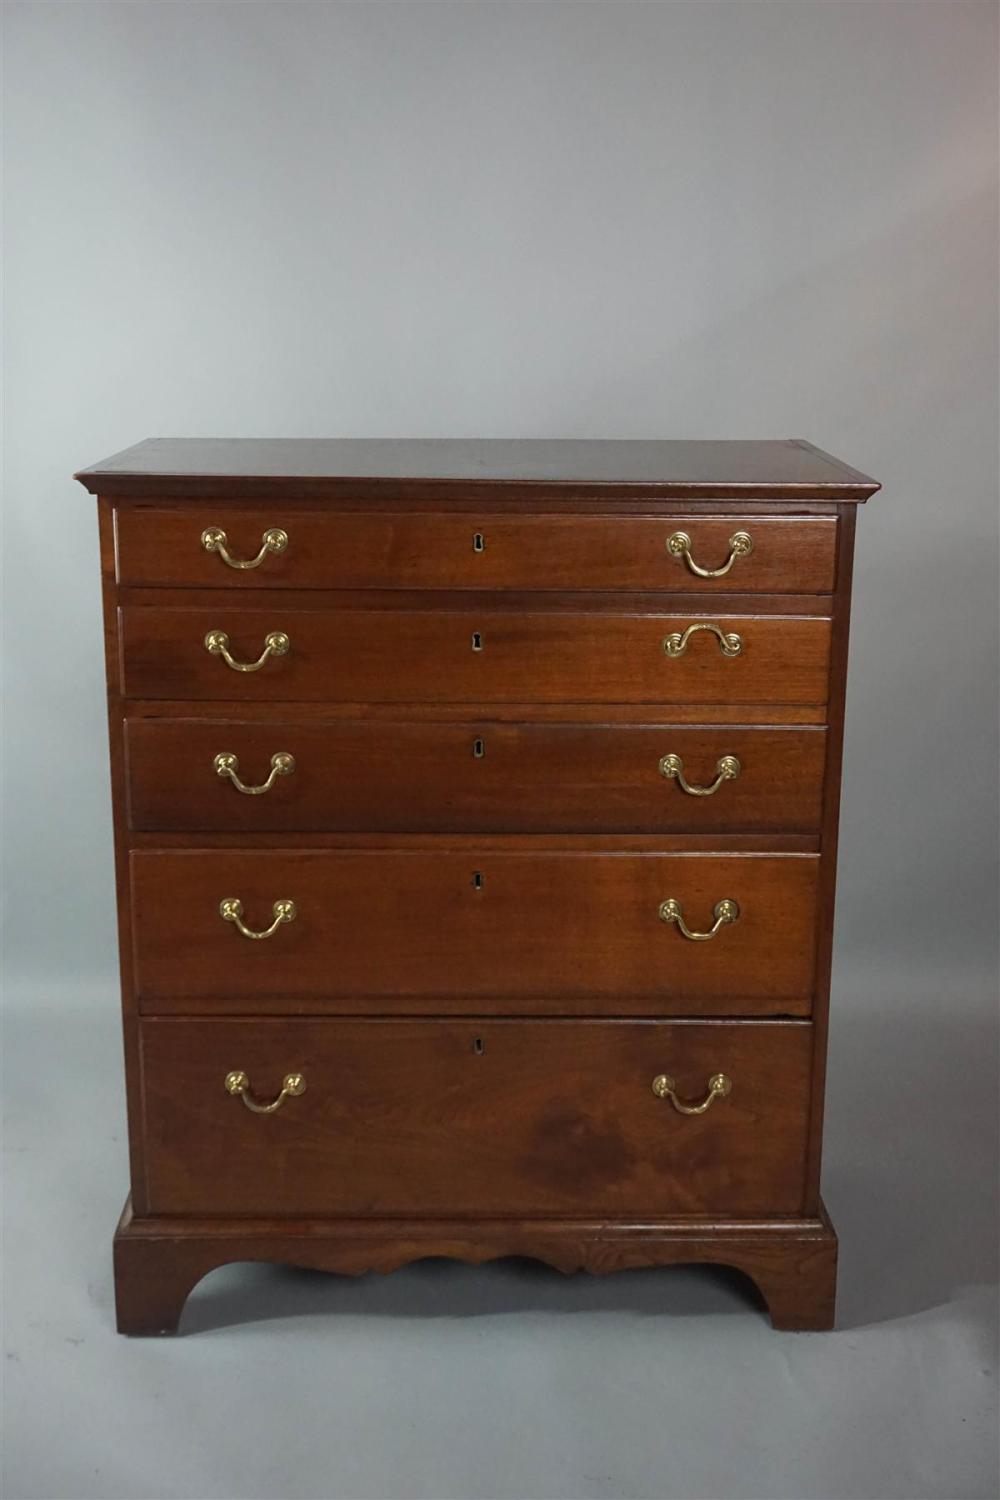 MARYLAND CHIPPENDALE WALNUT CHEST